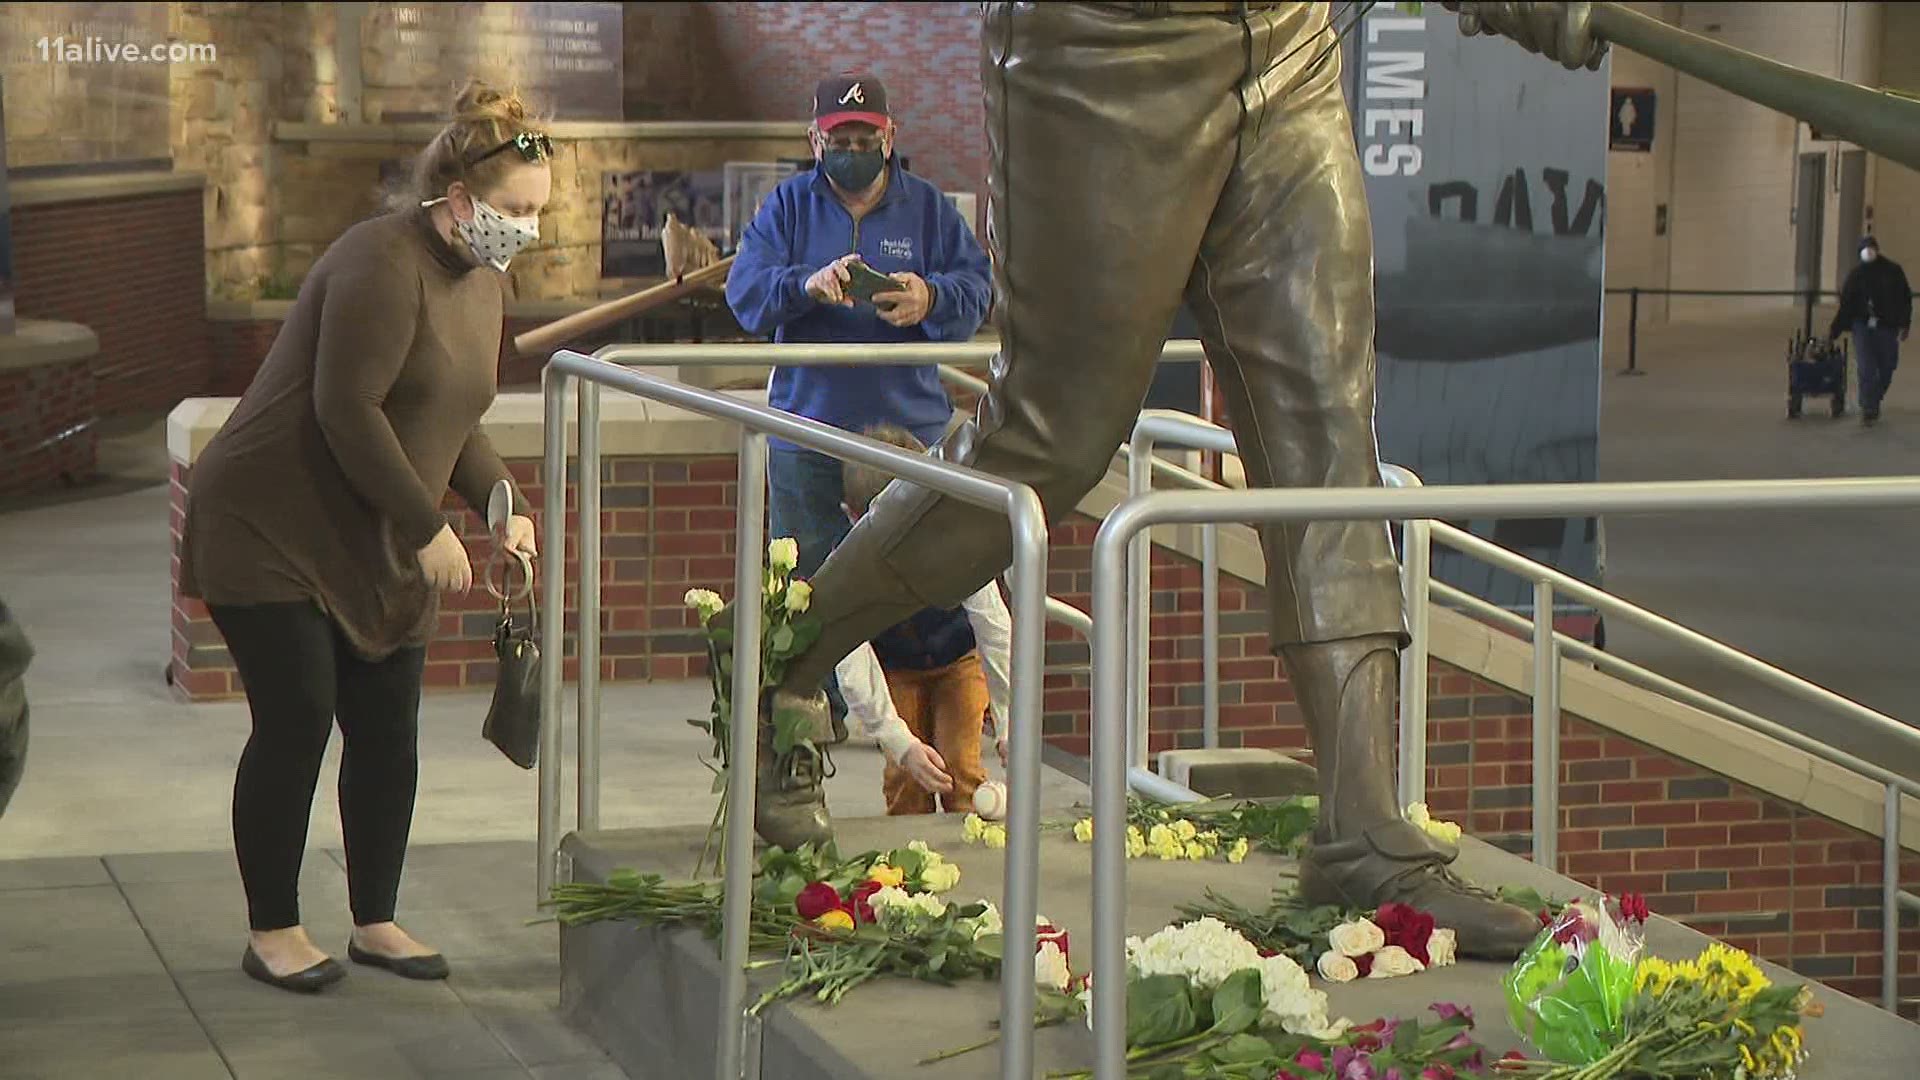 From President Joe Biden to fans in Atlanta, many are taking a moment to stop and honor the baseball legend.